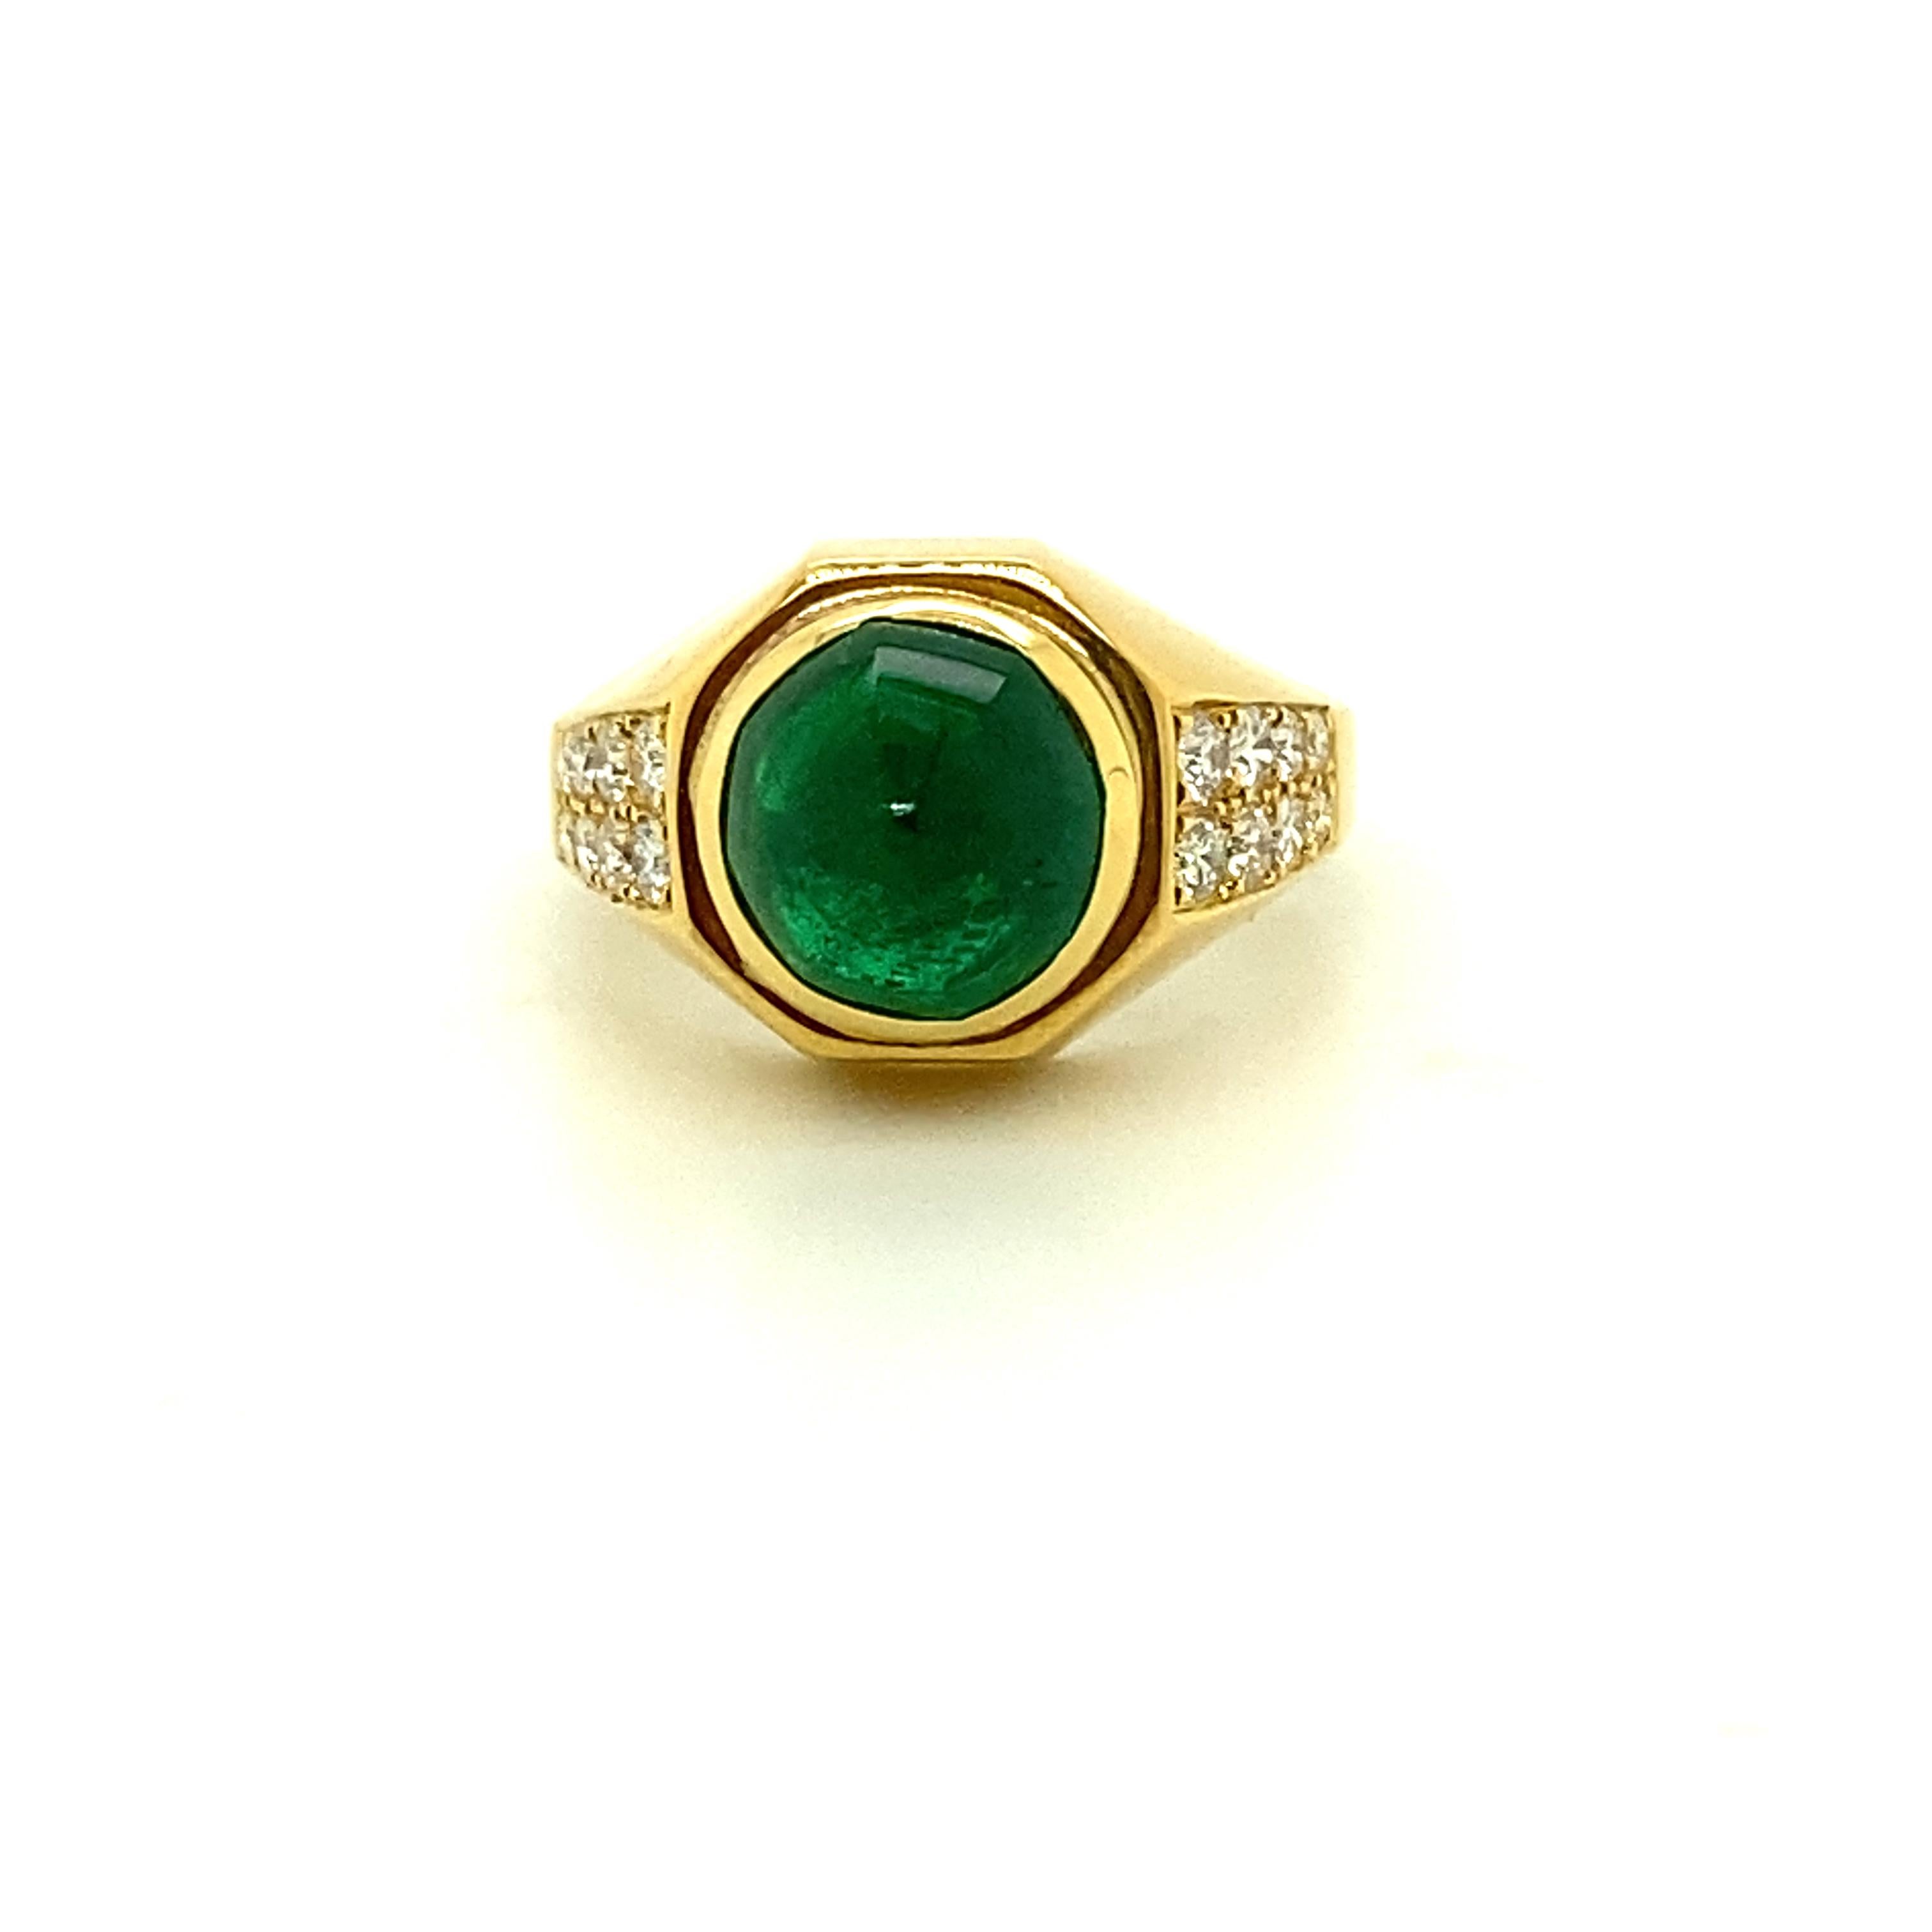 1960s Bulgari GRS Certified Vivid Green Sugarloaf Emerald and White Diamond Ring:

A stunning ring, it features a gorgeous sugarloaf cabochon emerald weighing 3.35 carat, with white round brilliant diamonds on both sides of the ring shank weighing a